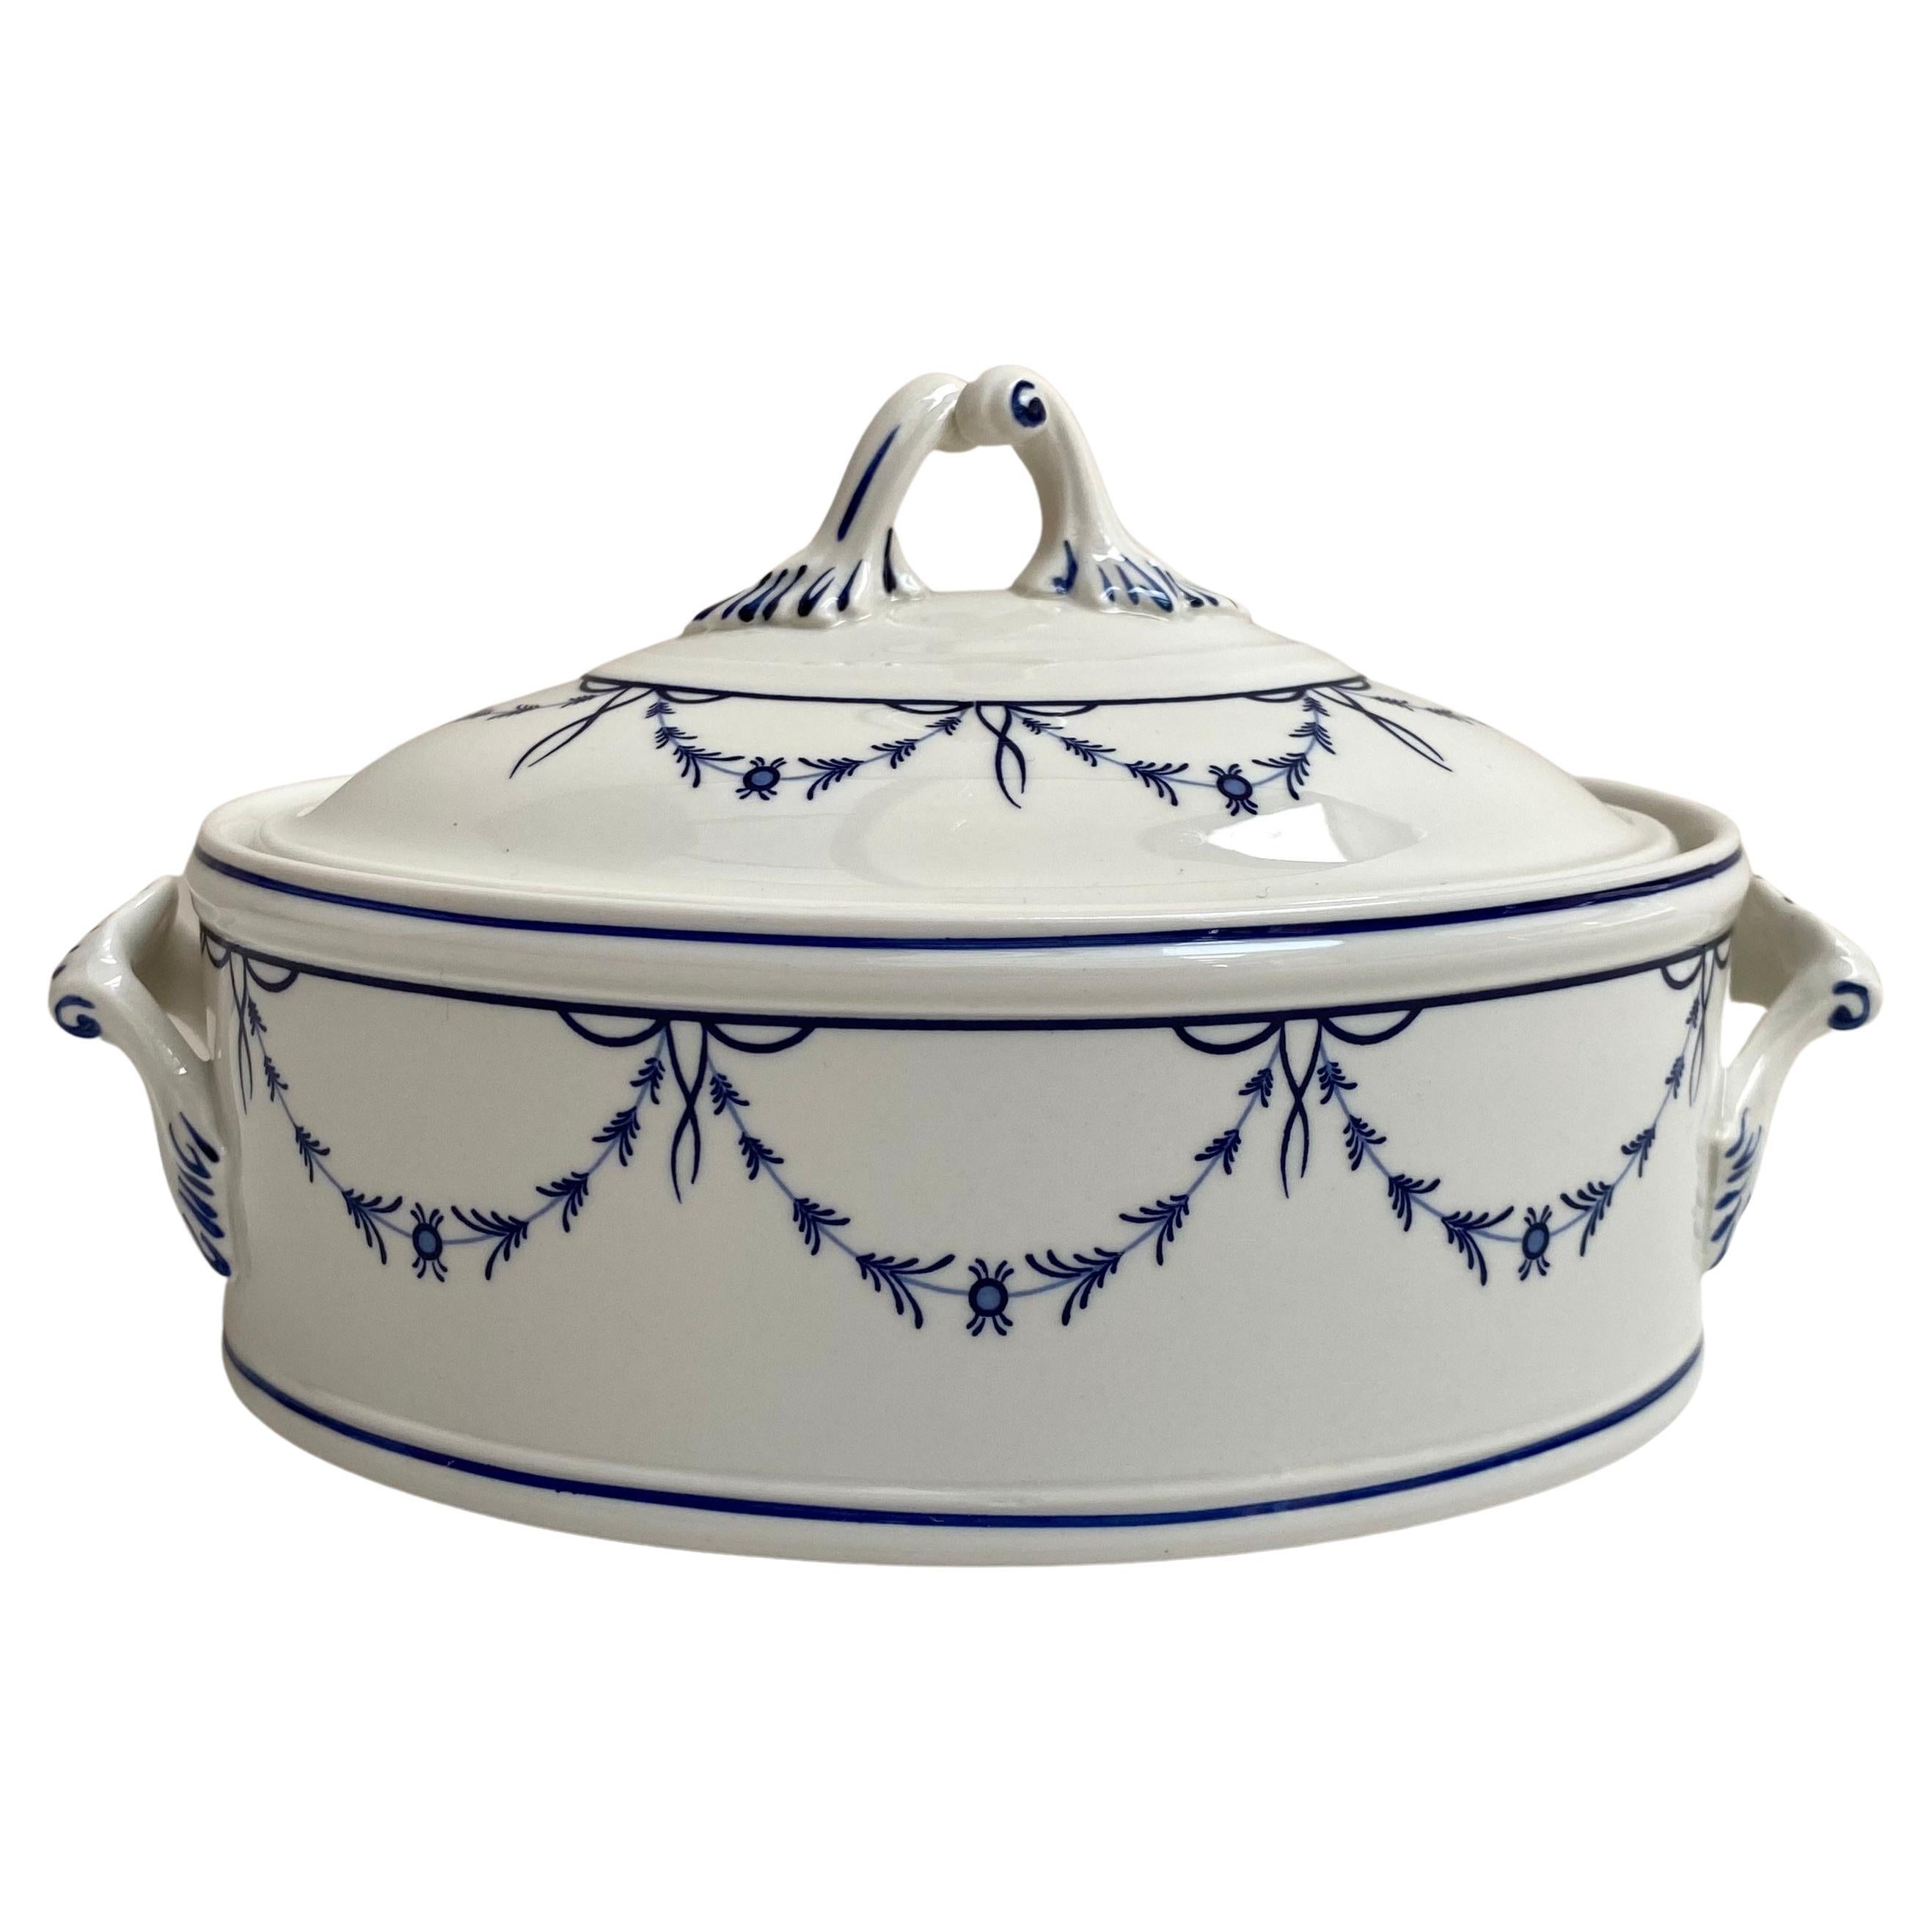 Miniature Oval Tureen with Lid Vieux Septfontaines Villeroy & Boch, Candy Bowl